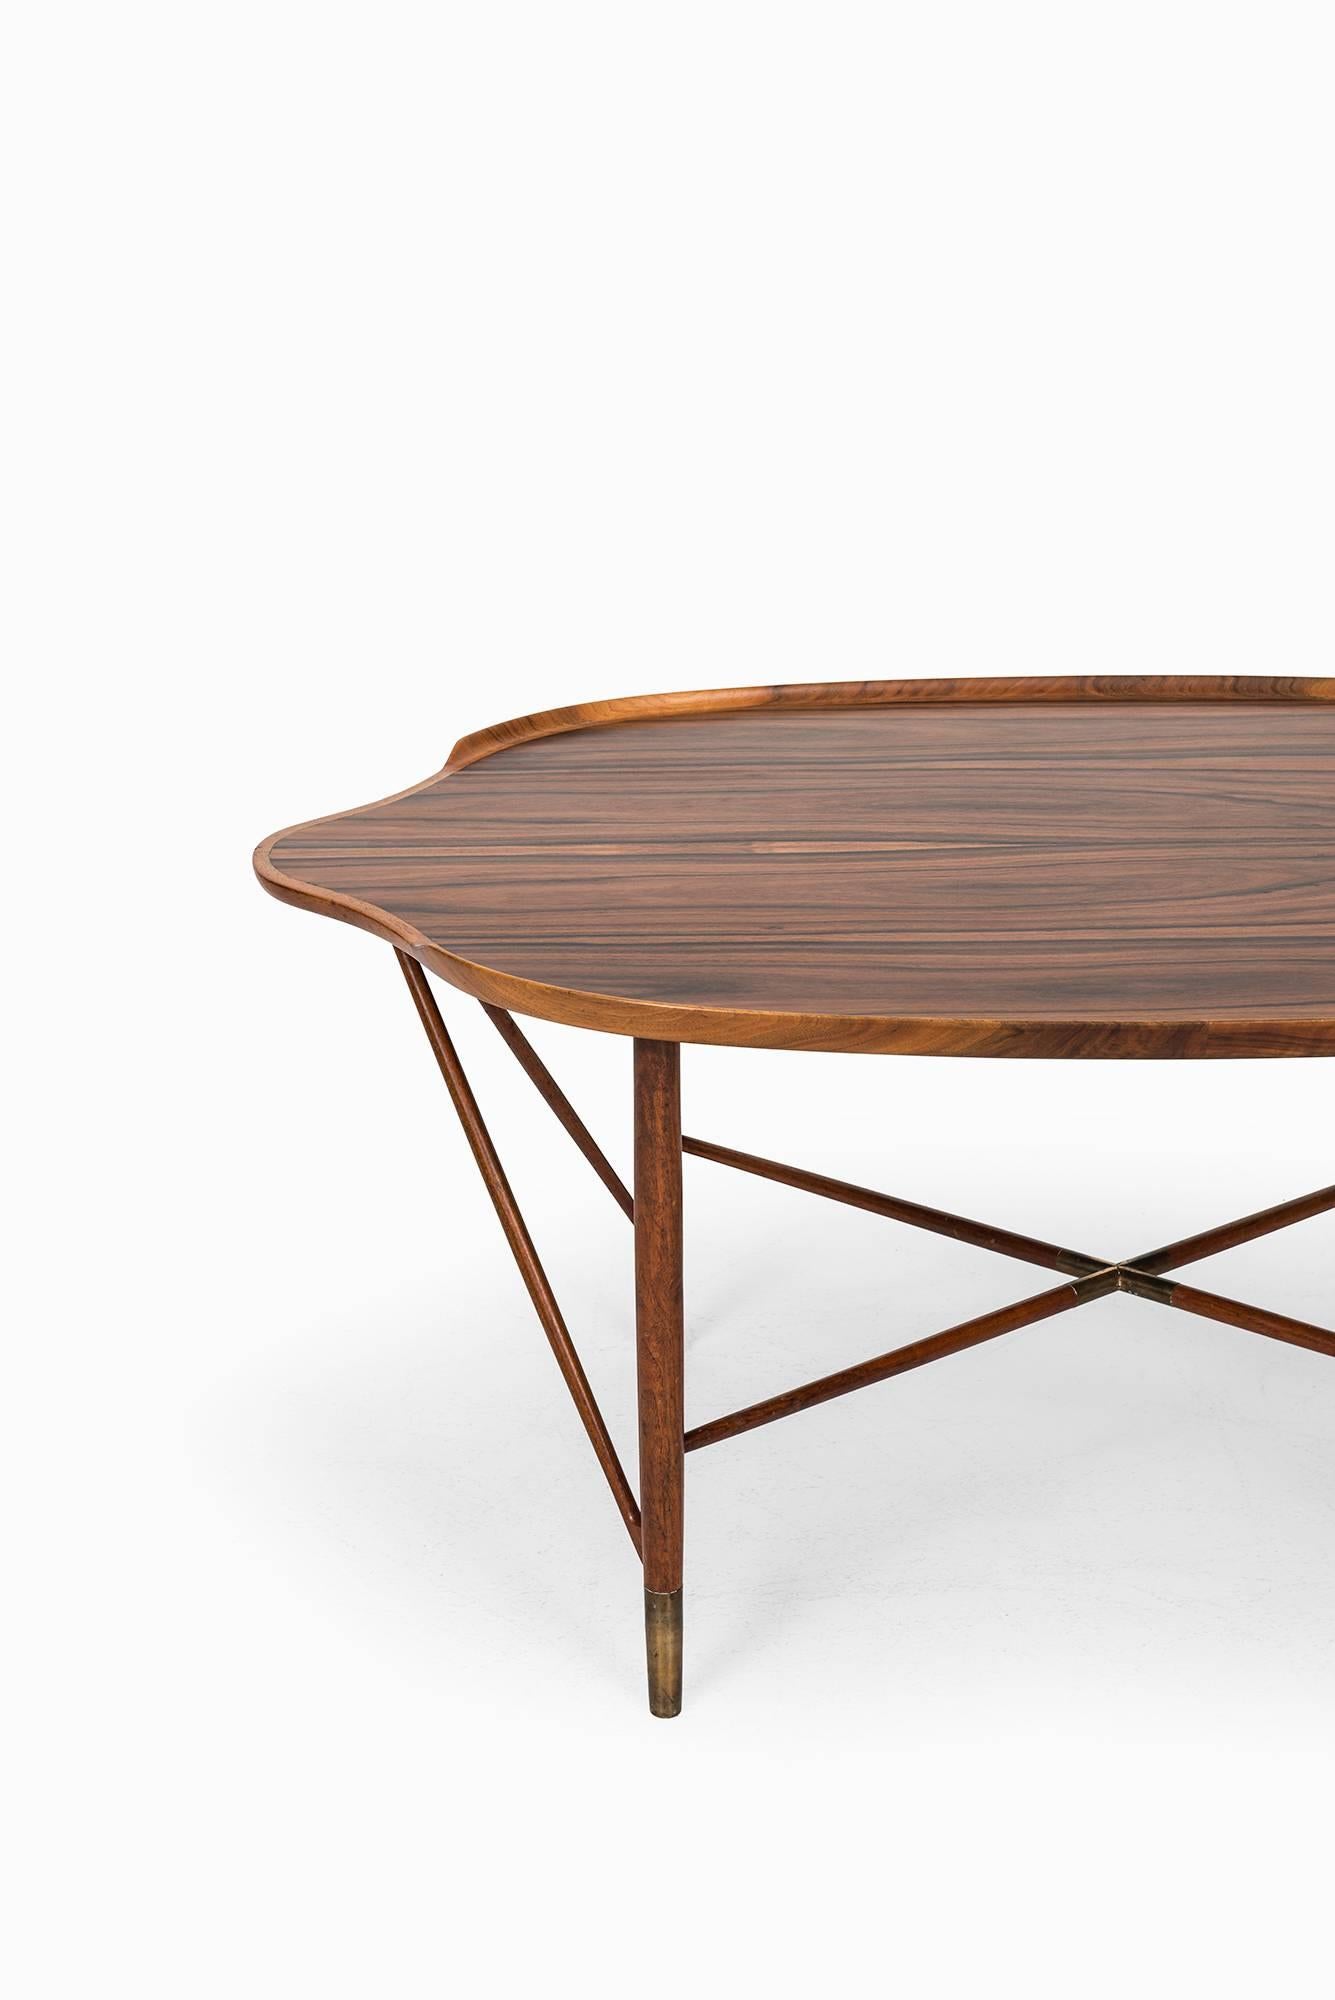 Very rare coffee table designed by William Watting. Produced by Michael Laursen in Denmark.